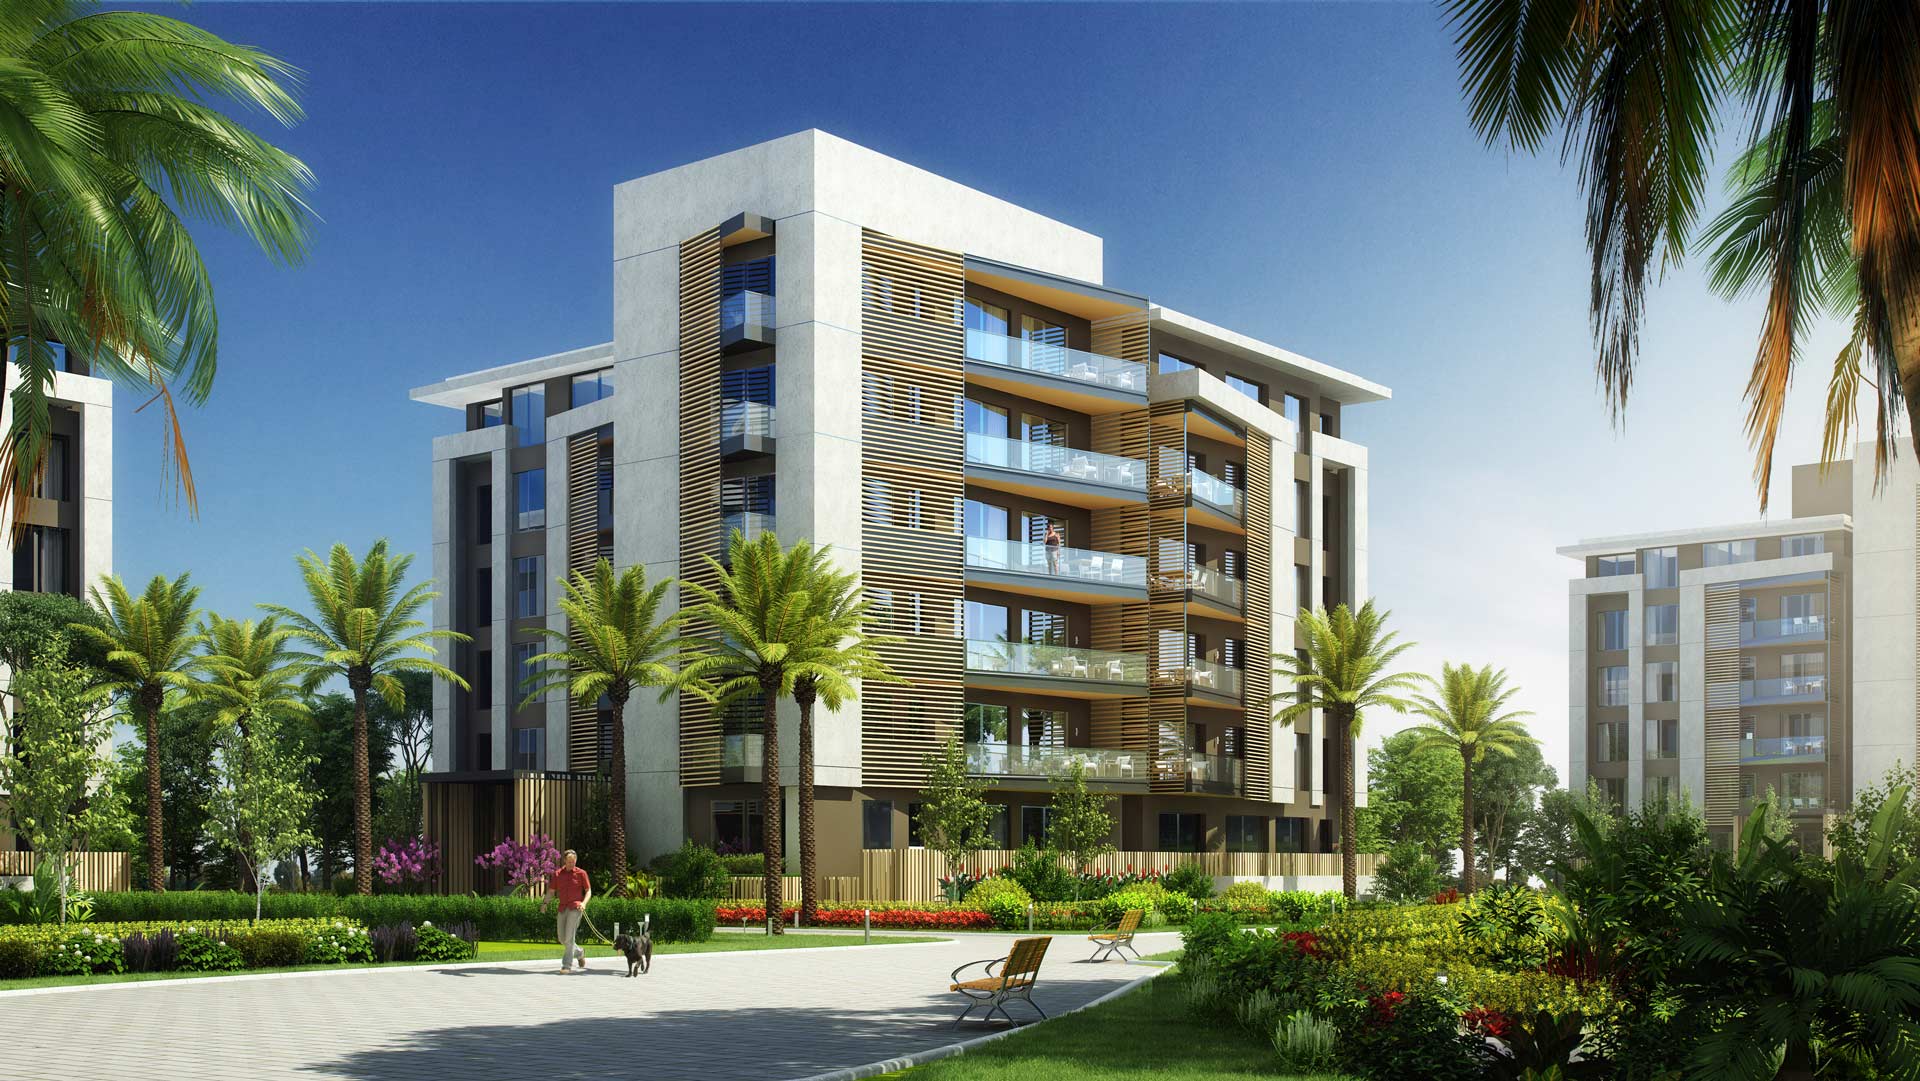 Get an Apartment in Privado Compound With An Area of 154 m²